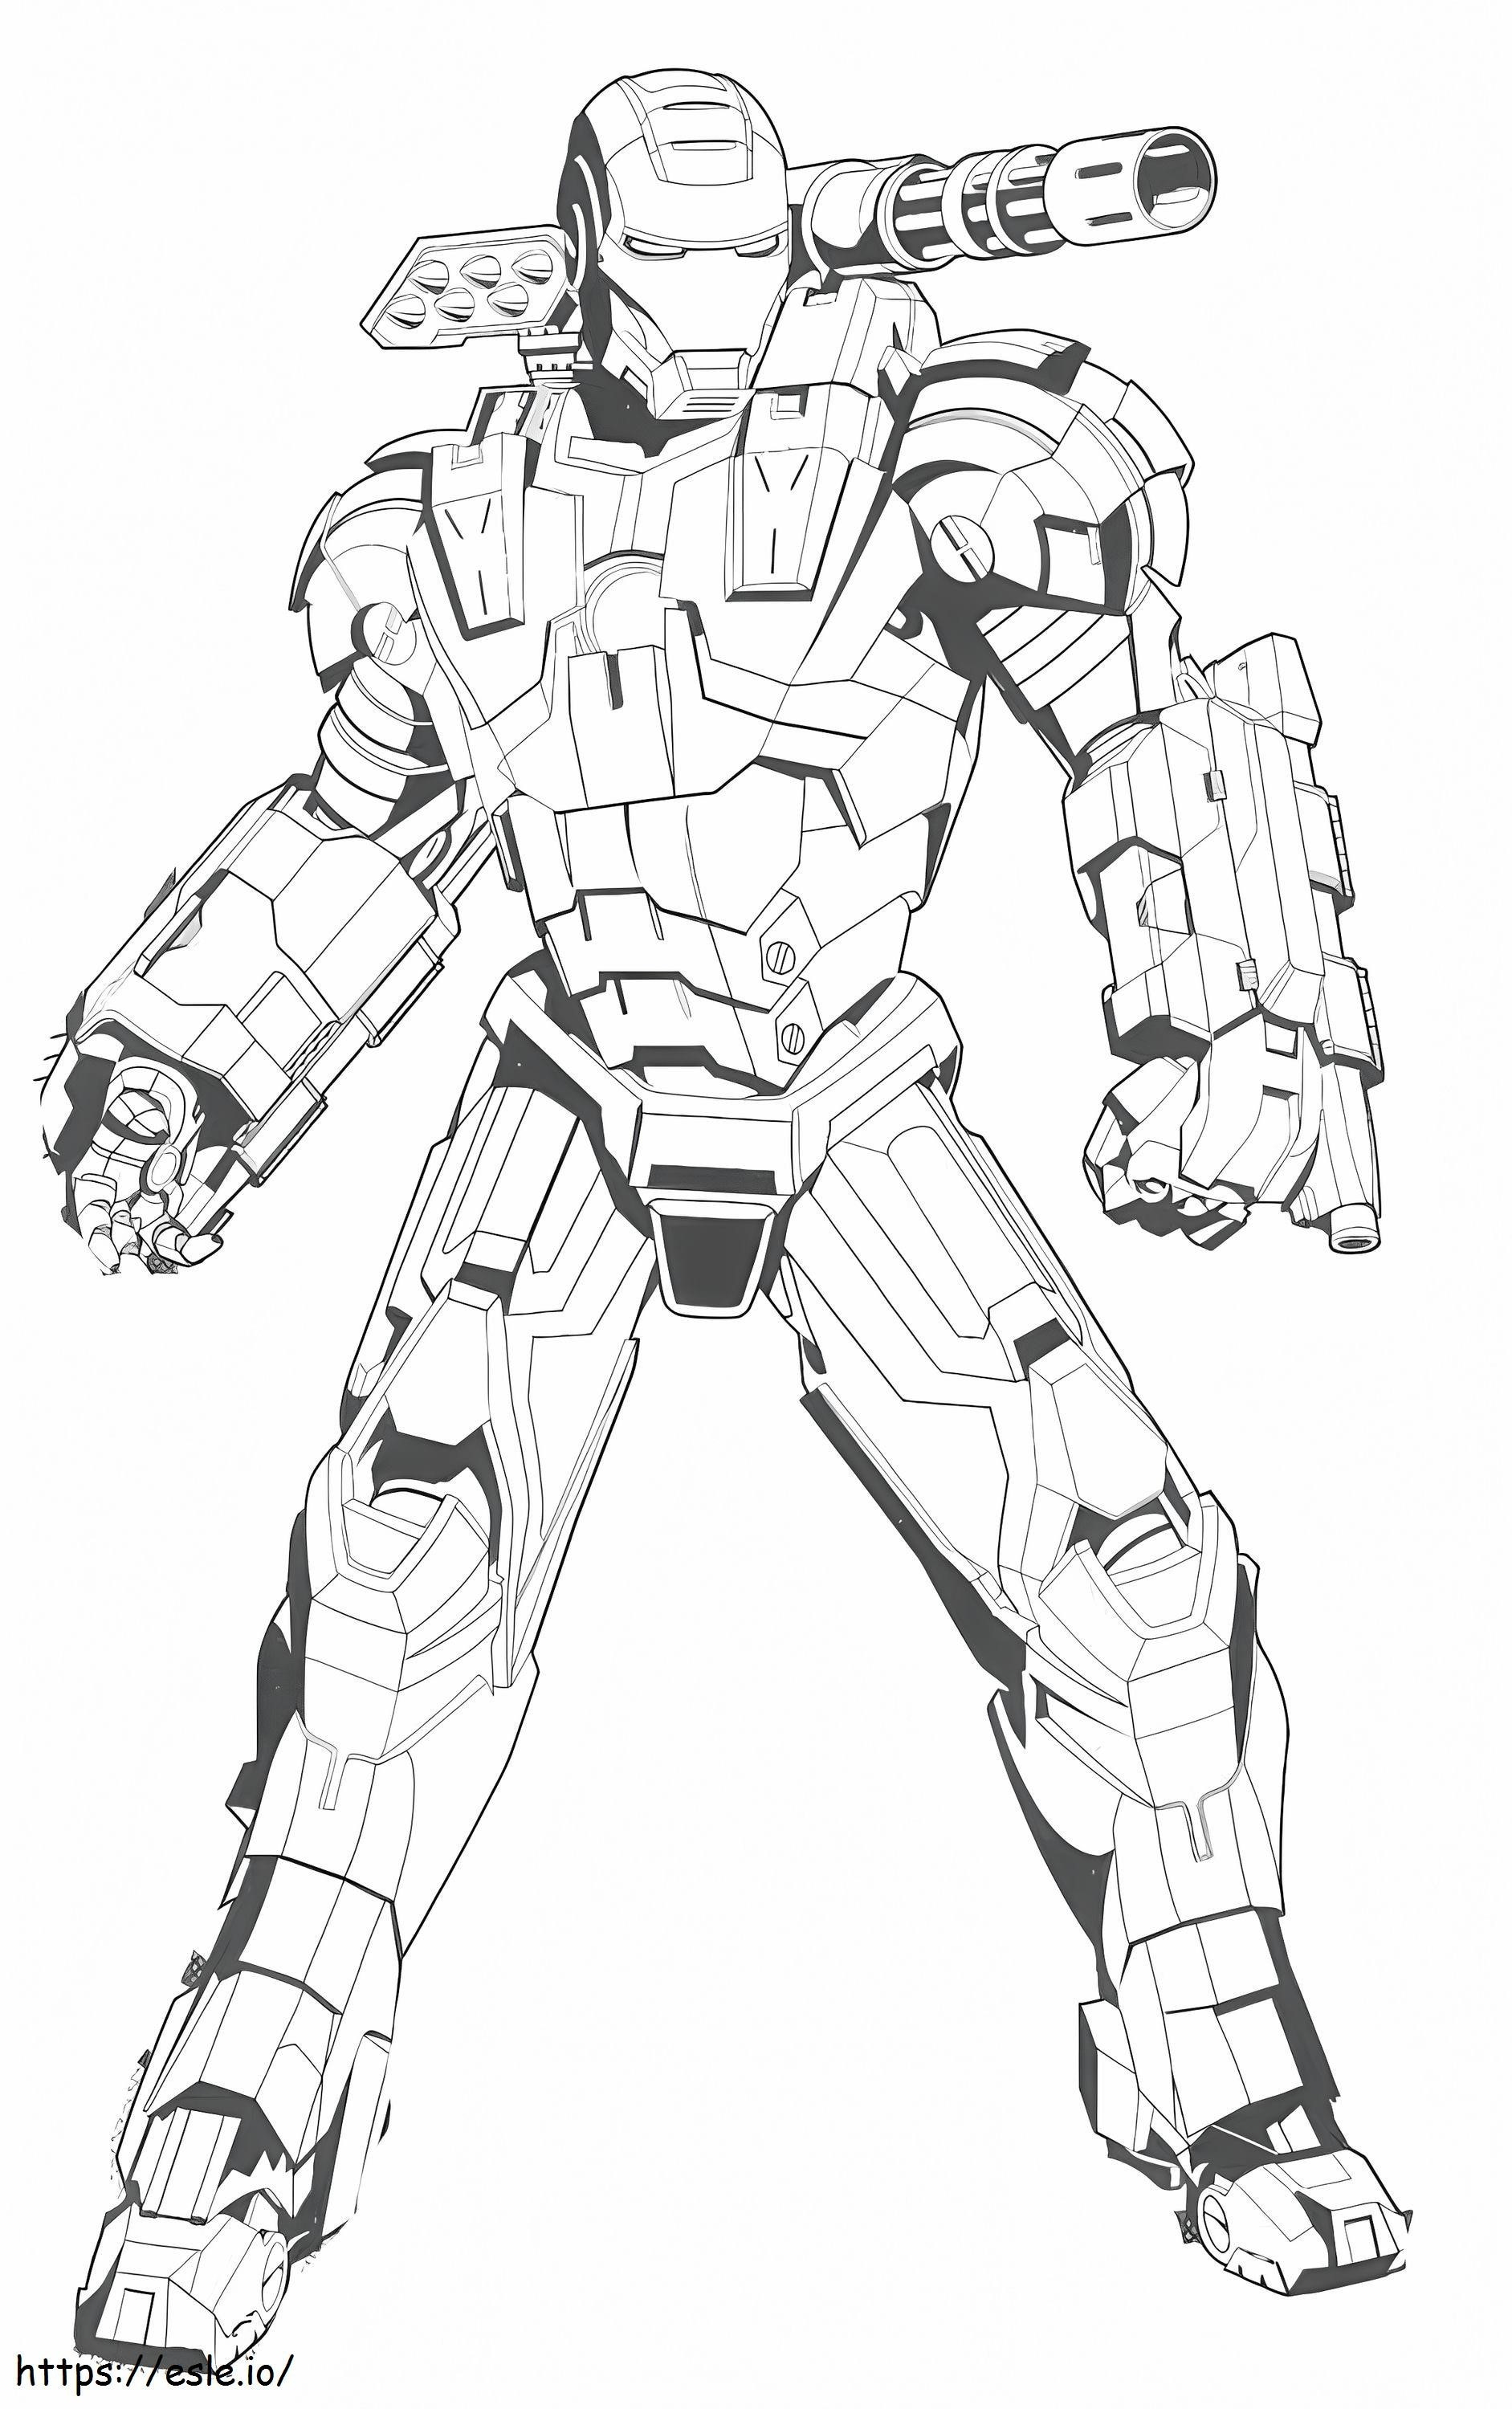 1560588386 Ironman With Gun A4 coloring page